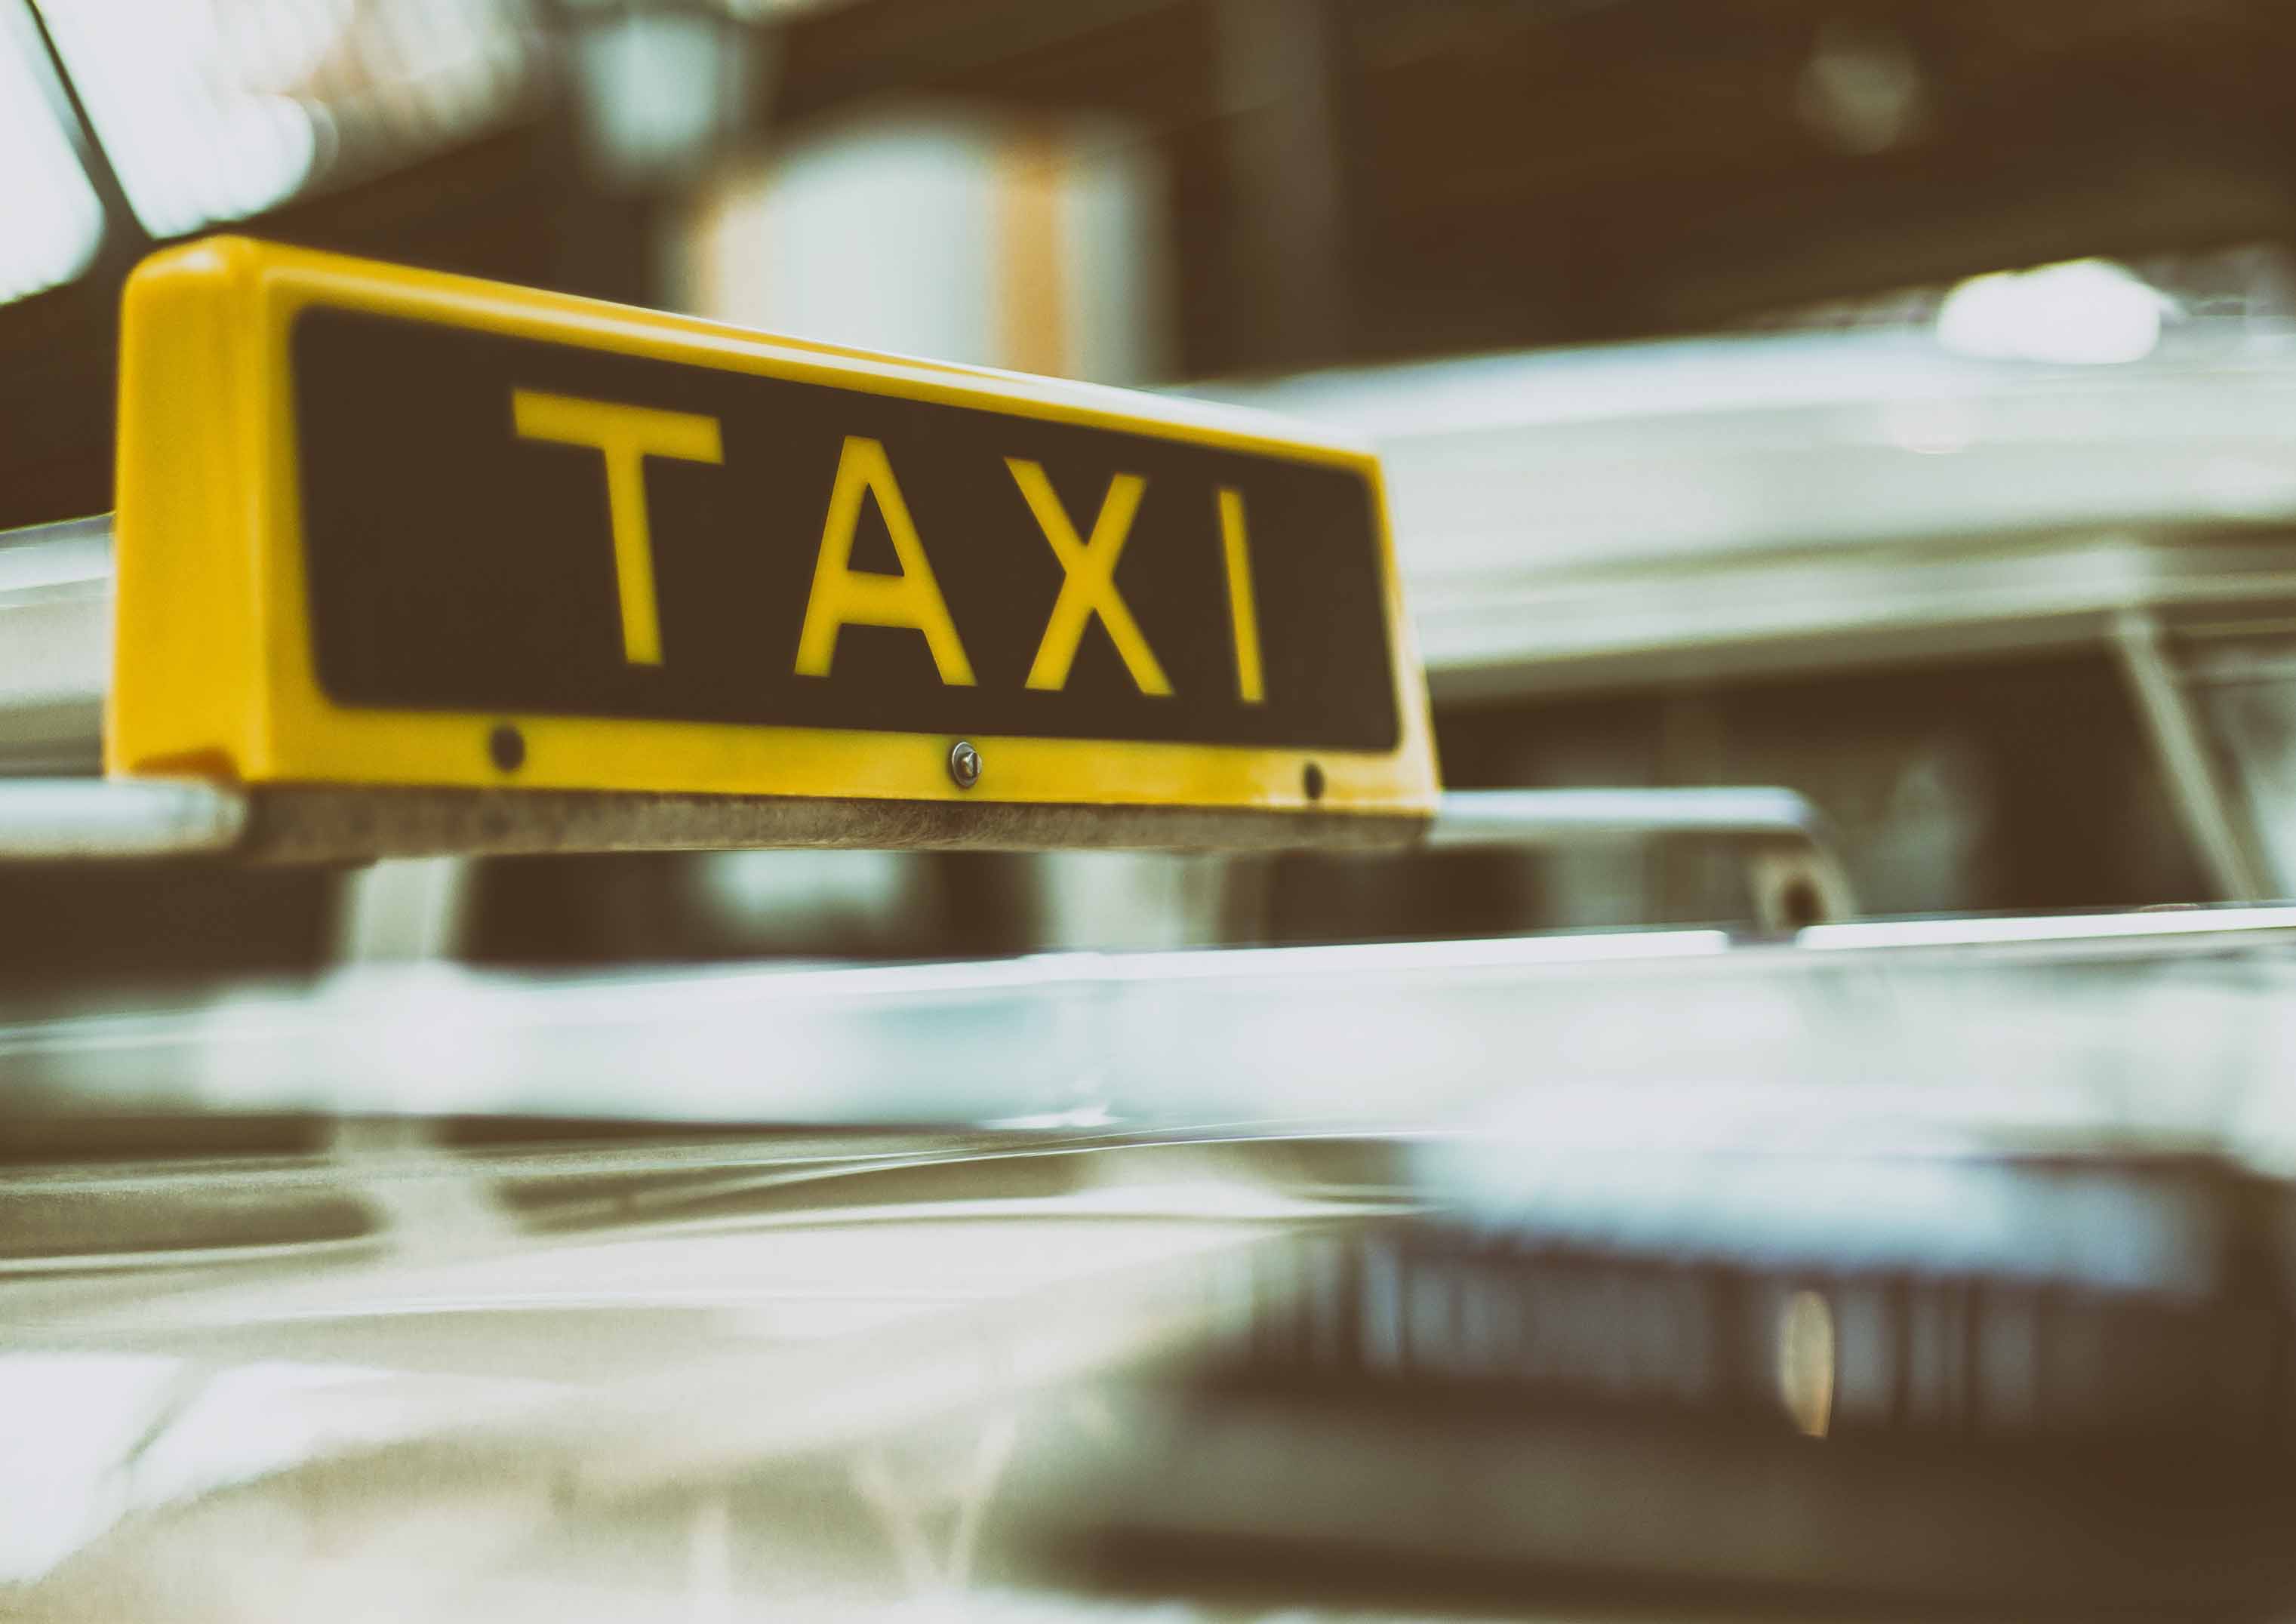 taxi sign